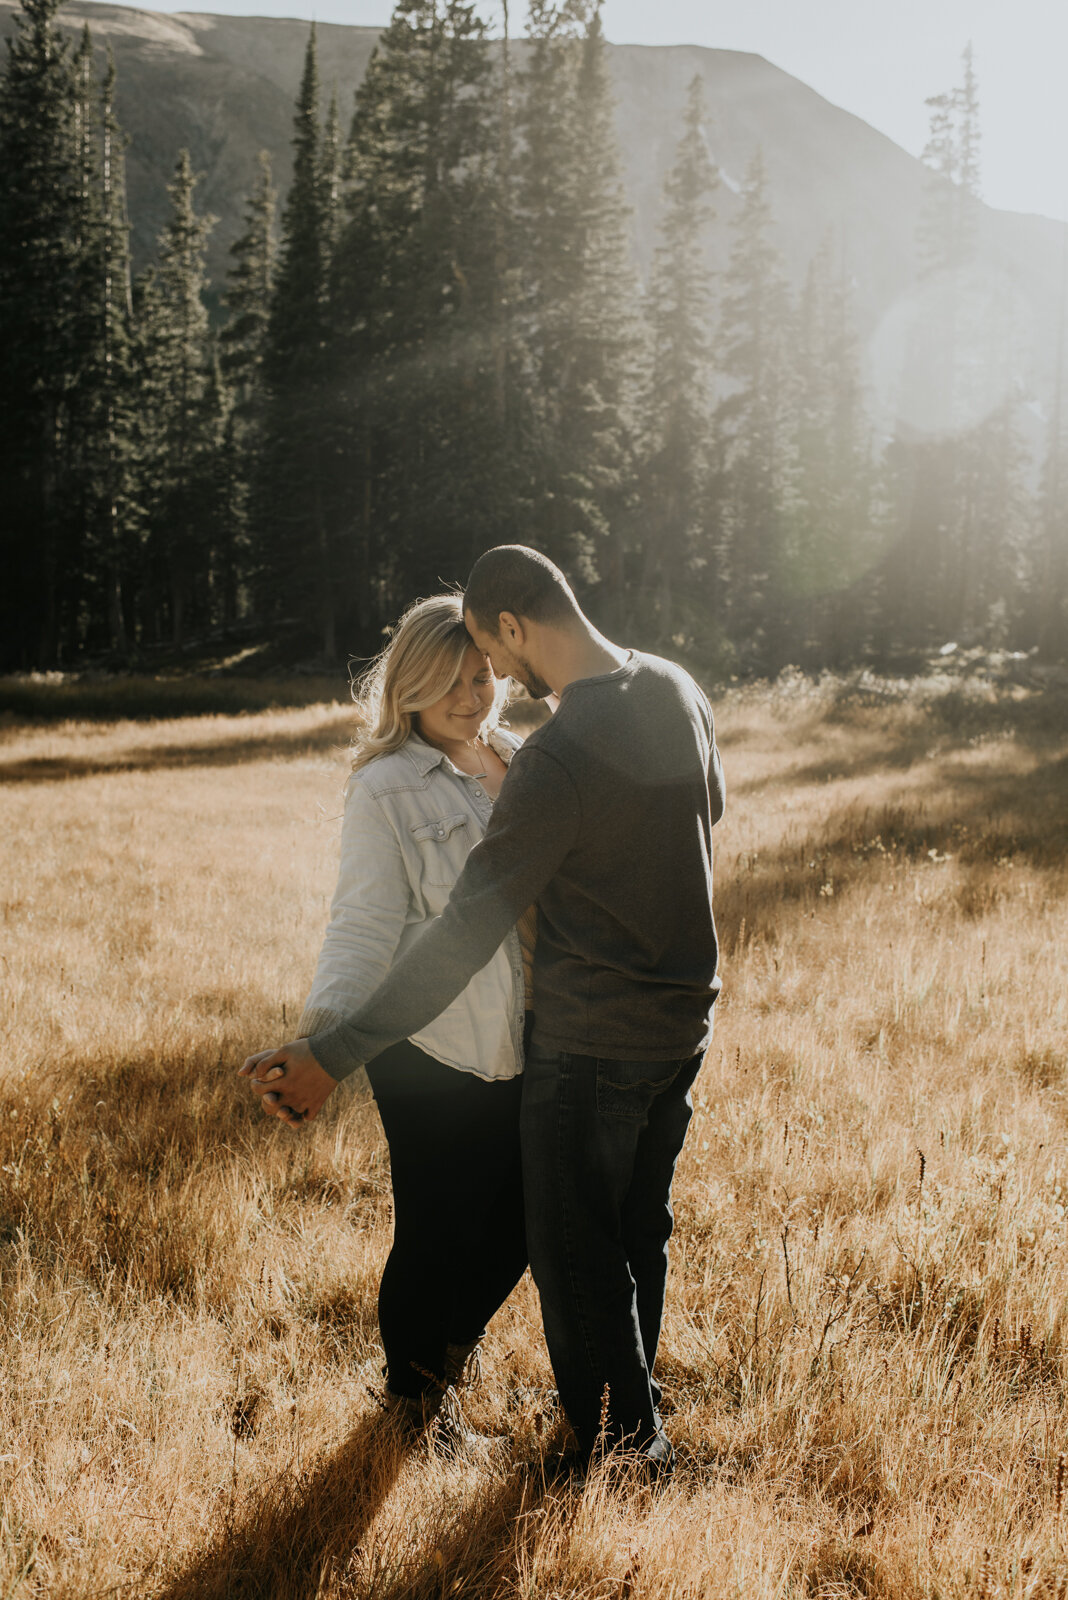 Indian Peaks Wilderness Area Engagement Photos